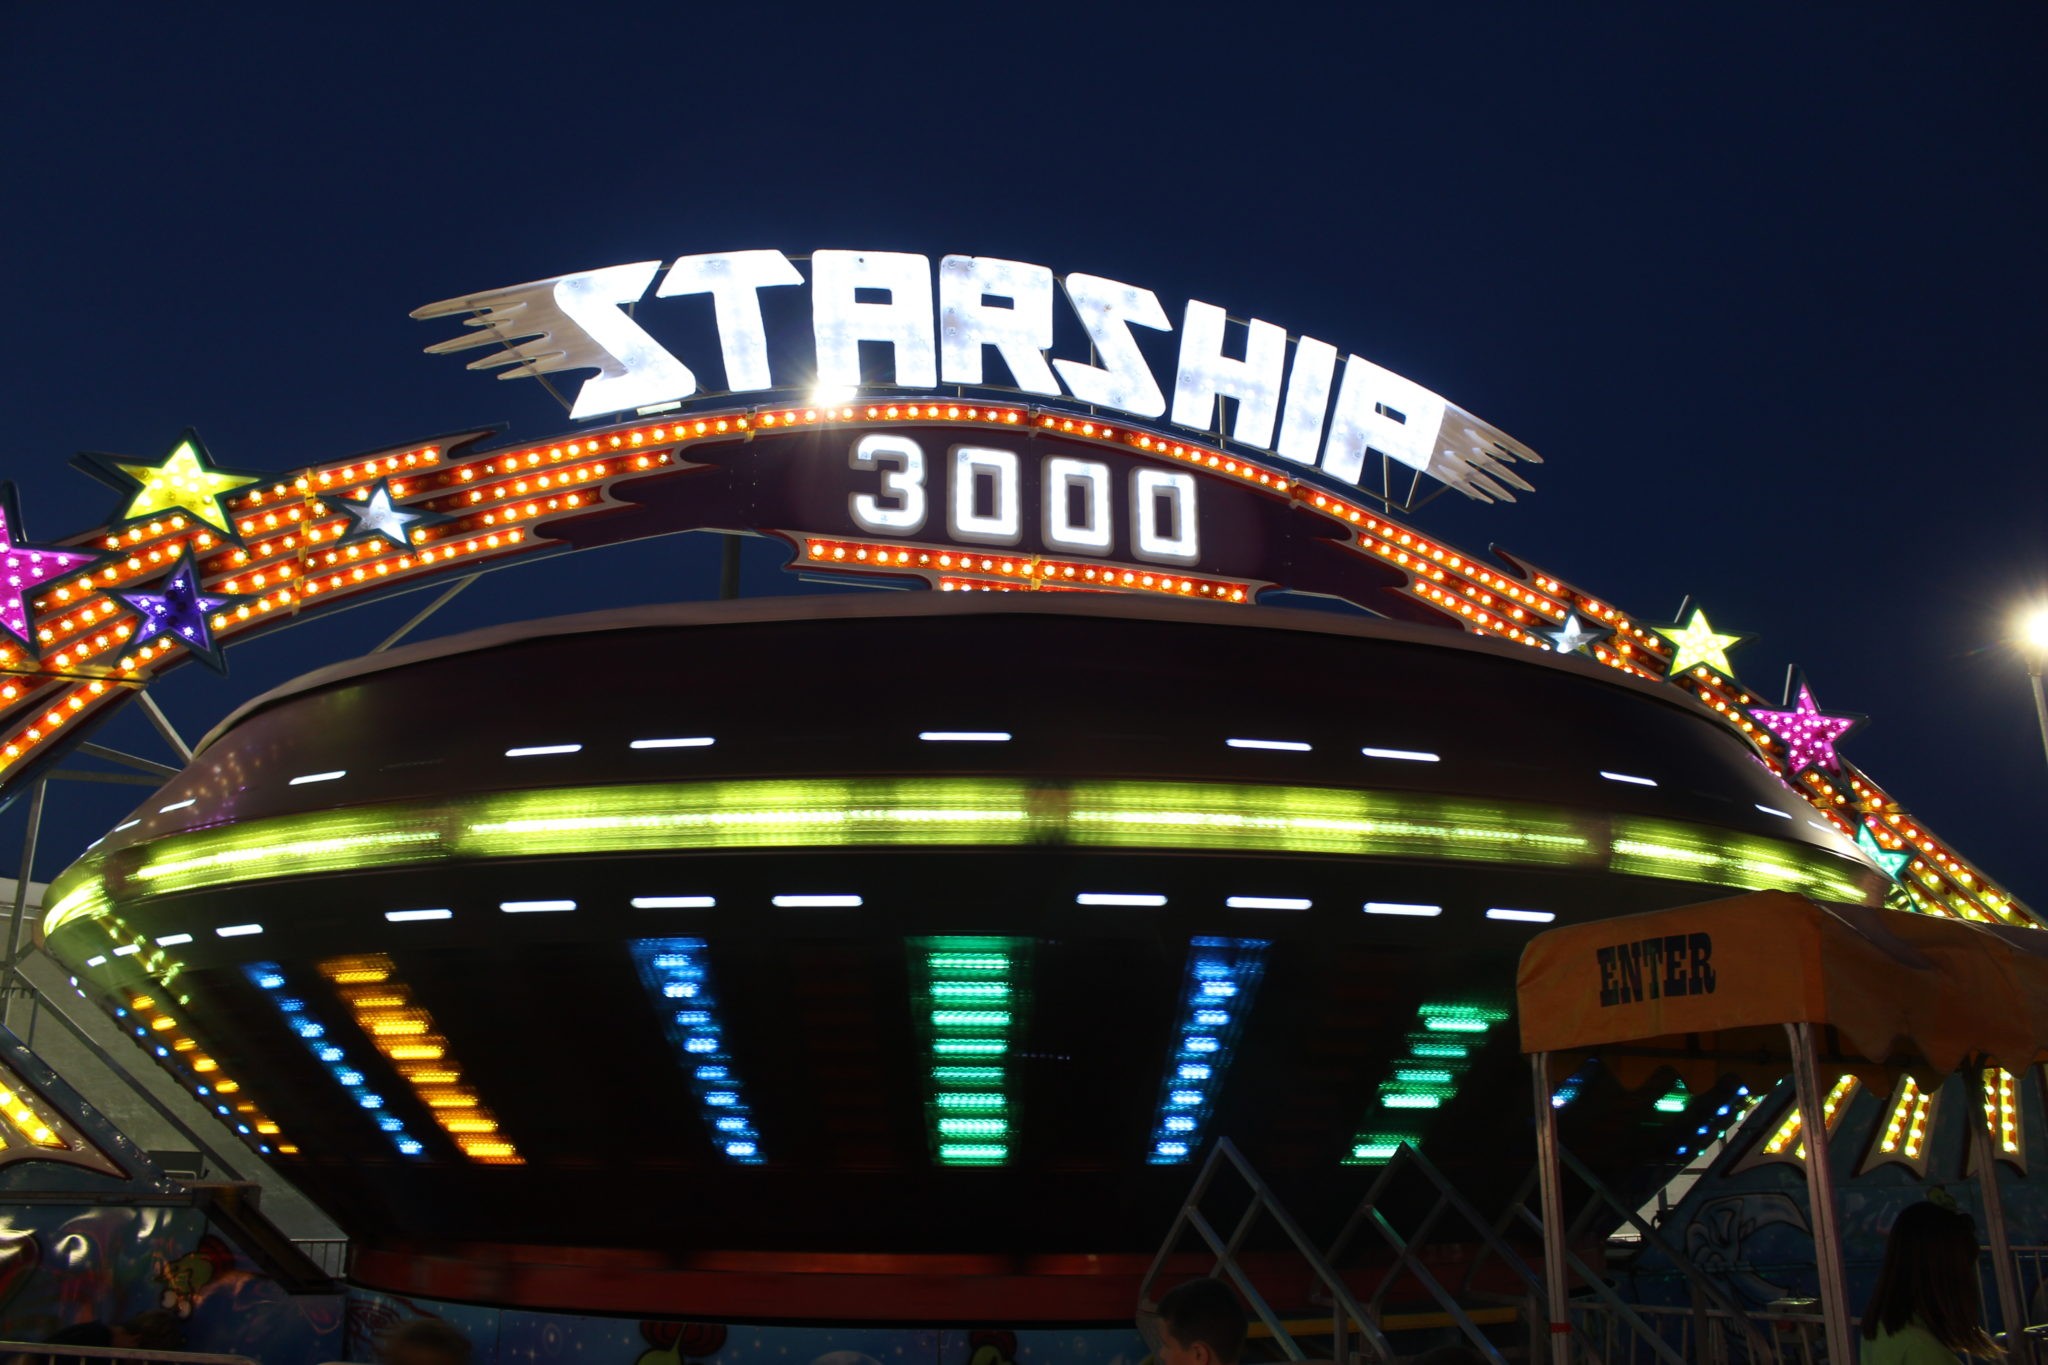 Jenkinson's Boardwalk Starship 3000 Ride. Spins around so fast you start to float off the ground!